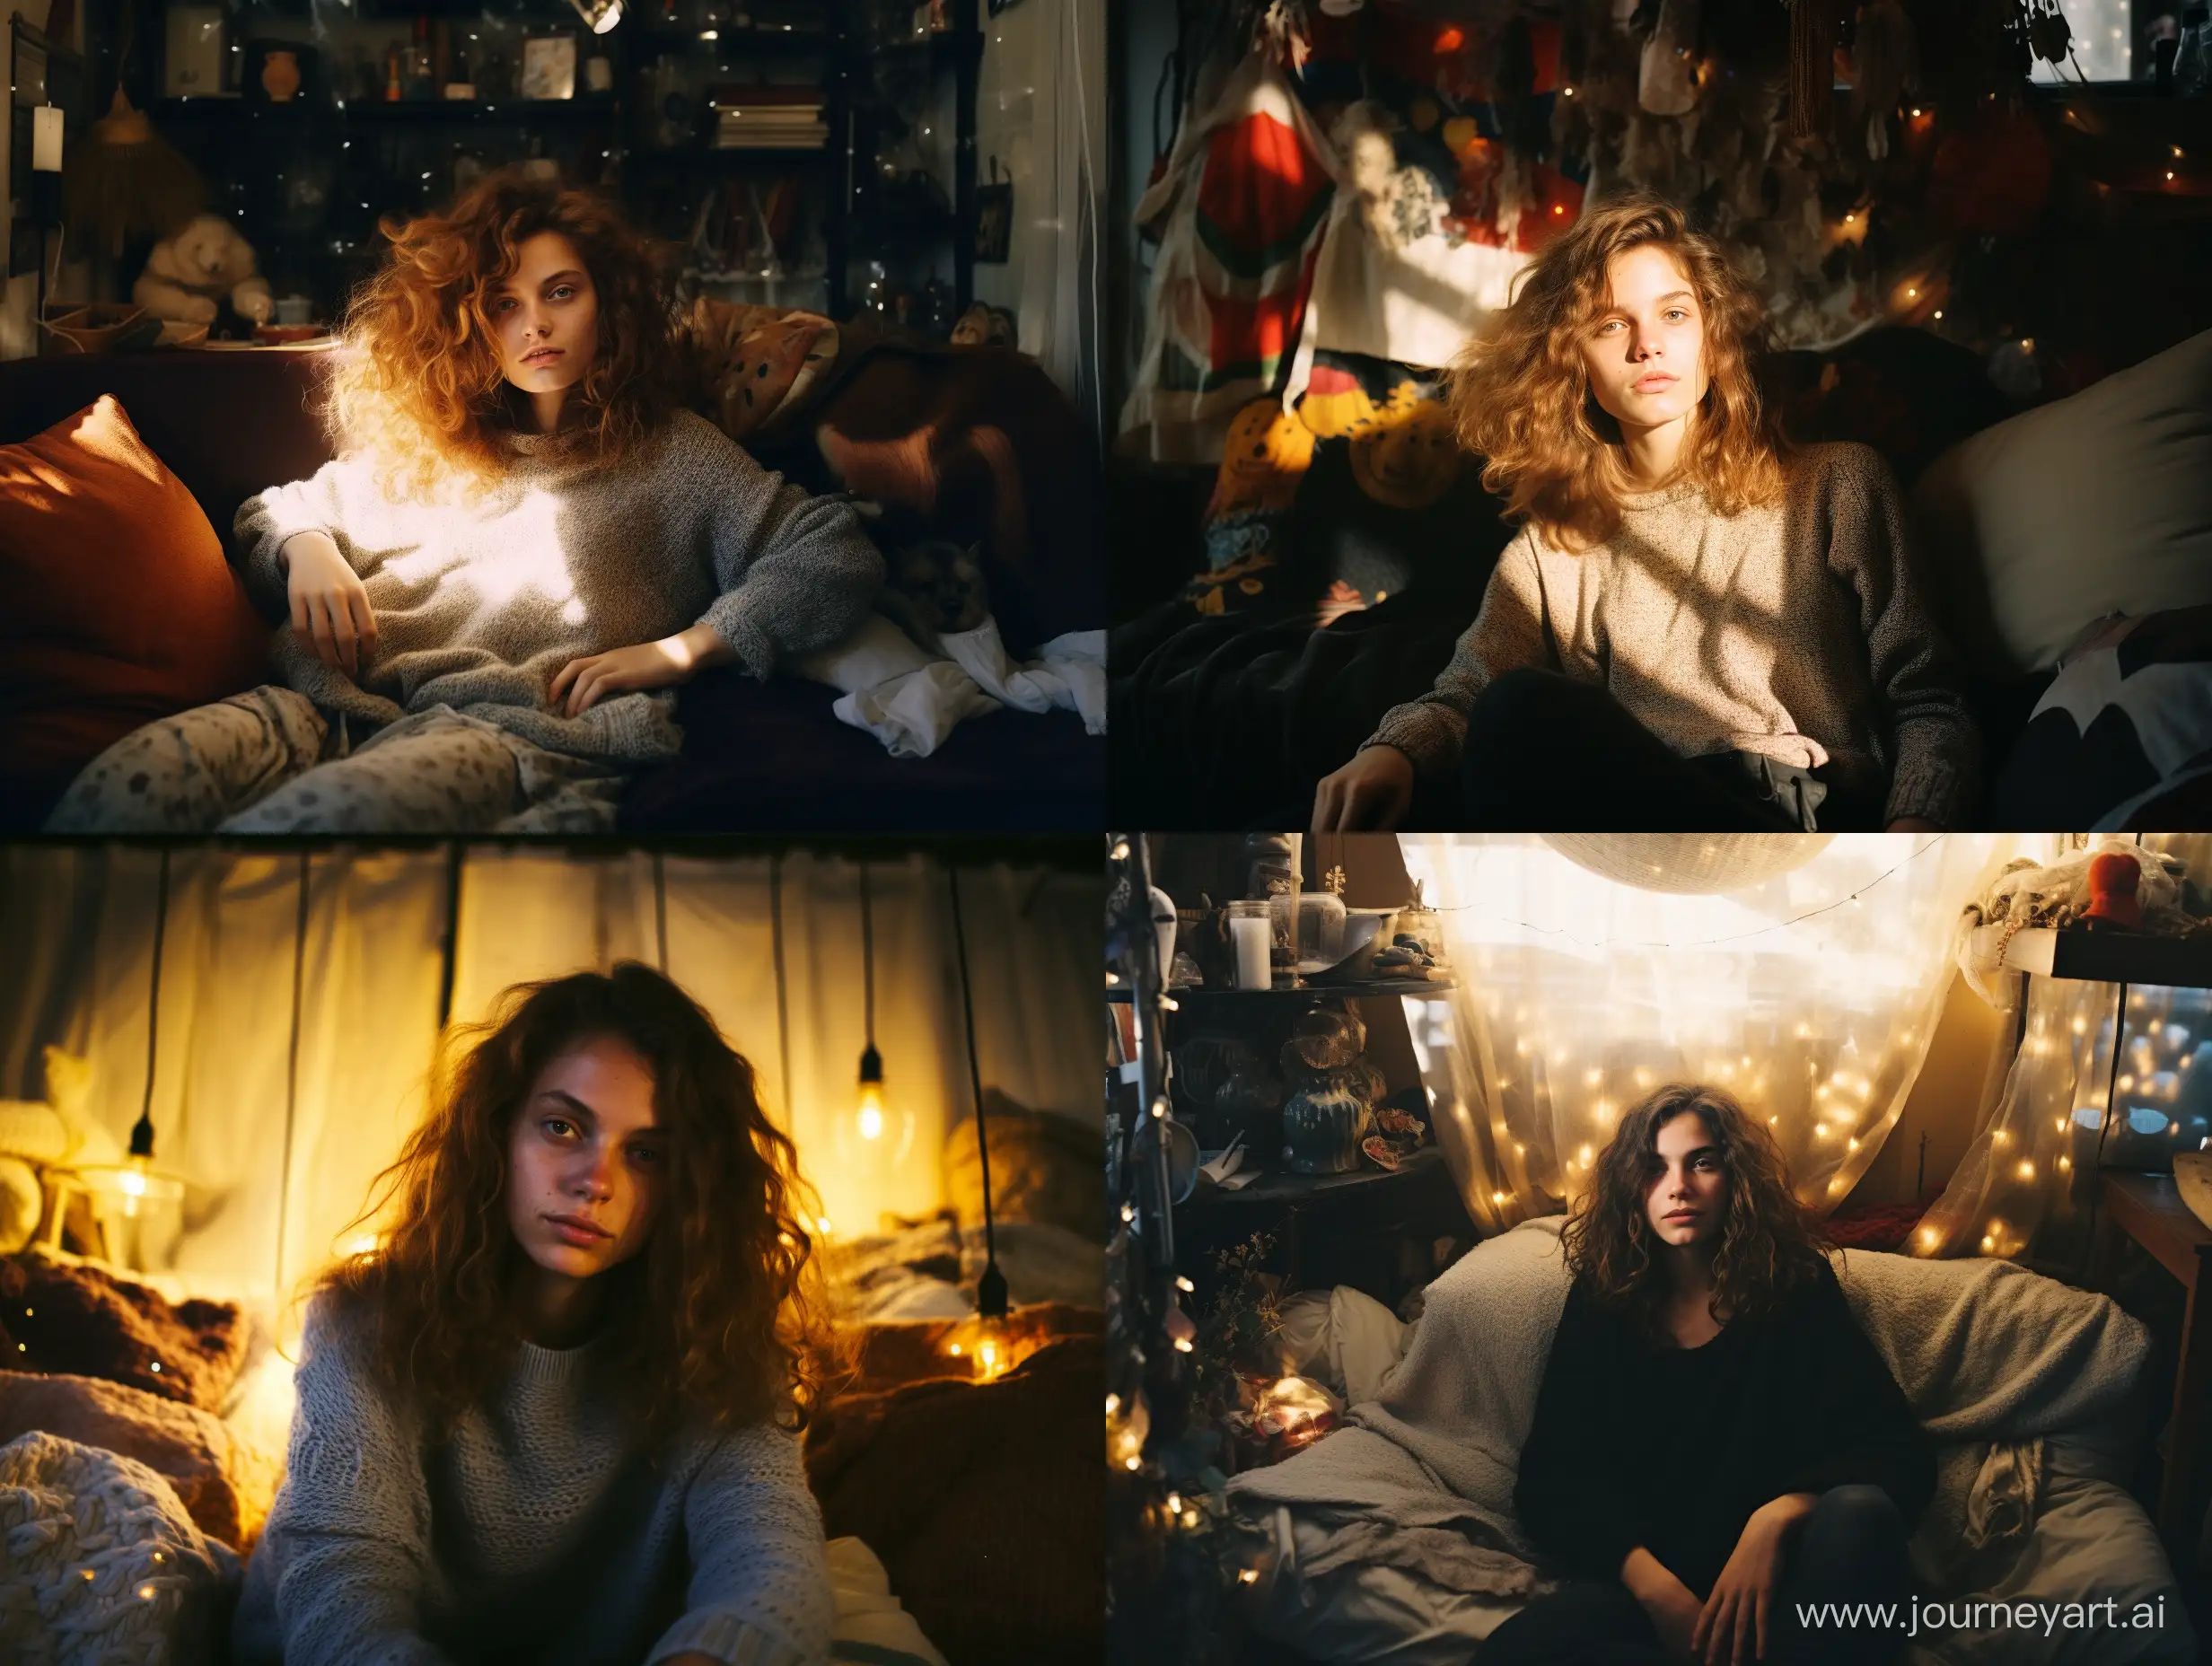 Mysterious-Atmosphere-in-Enchanted-Apartment-with-Girl-in-Sweater